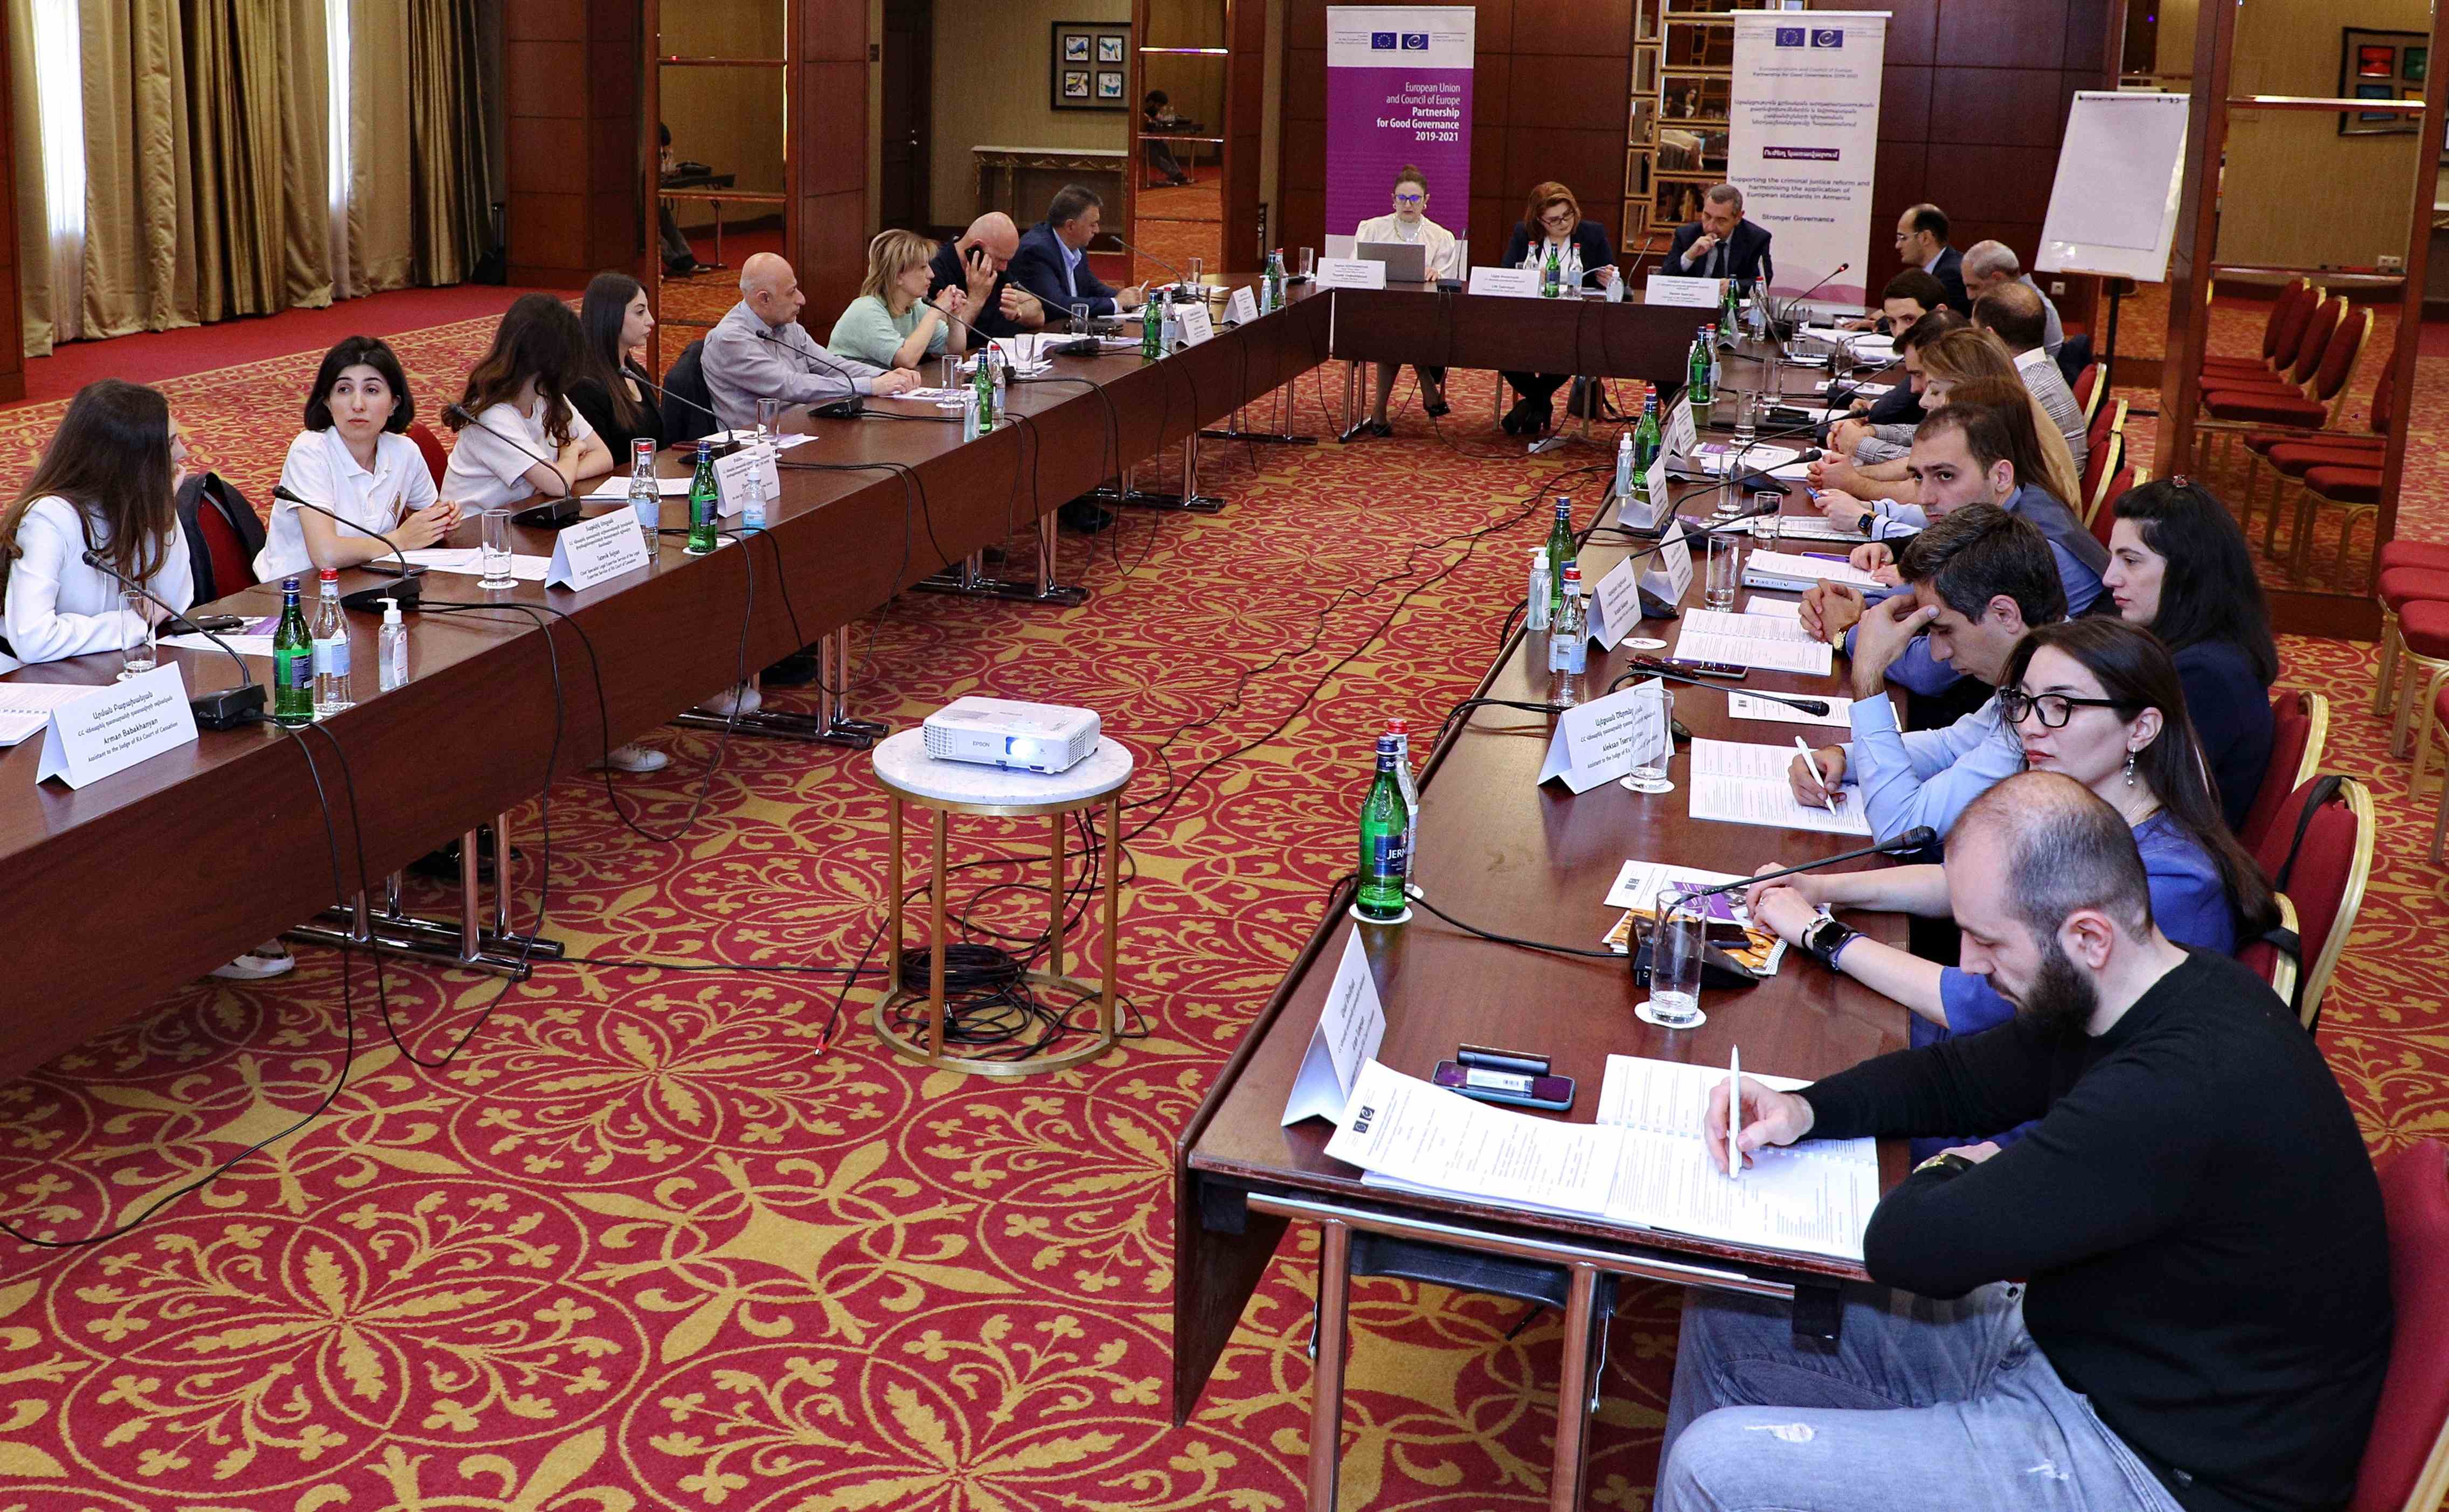 Judiciary of the Court of Cassation of Armenia enhance their knowledge and skills on the new criminal procedure legislation of the country